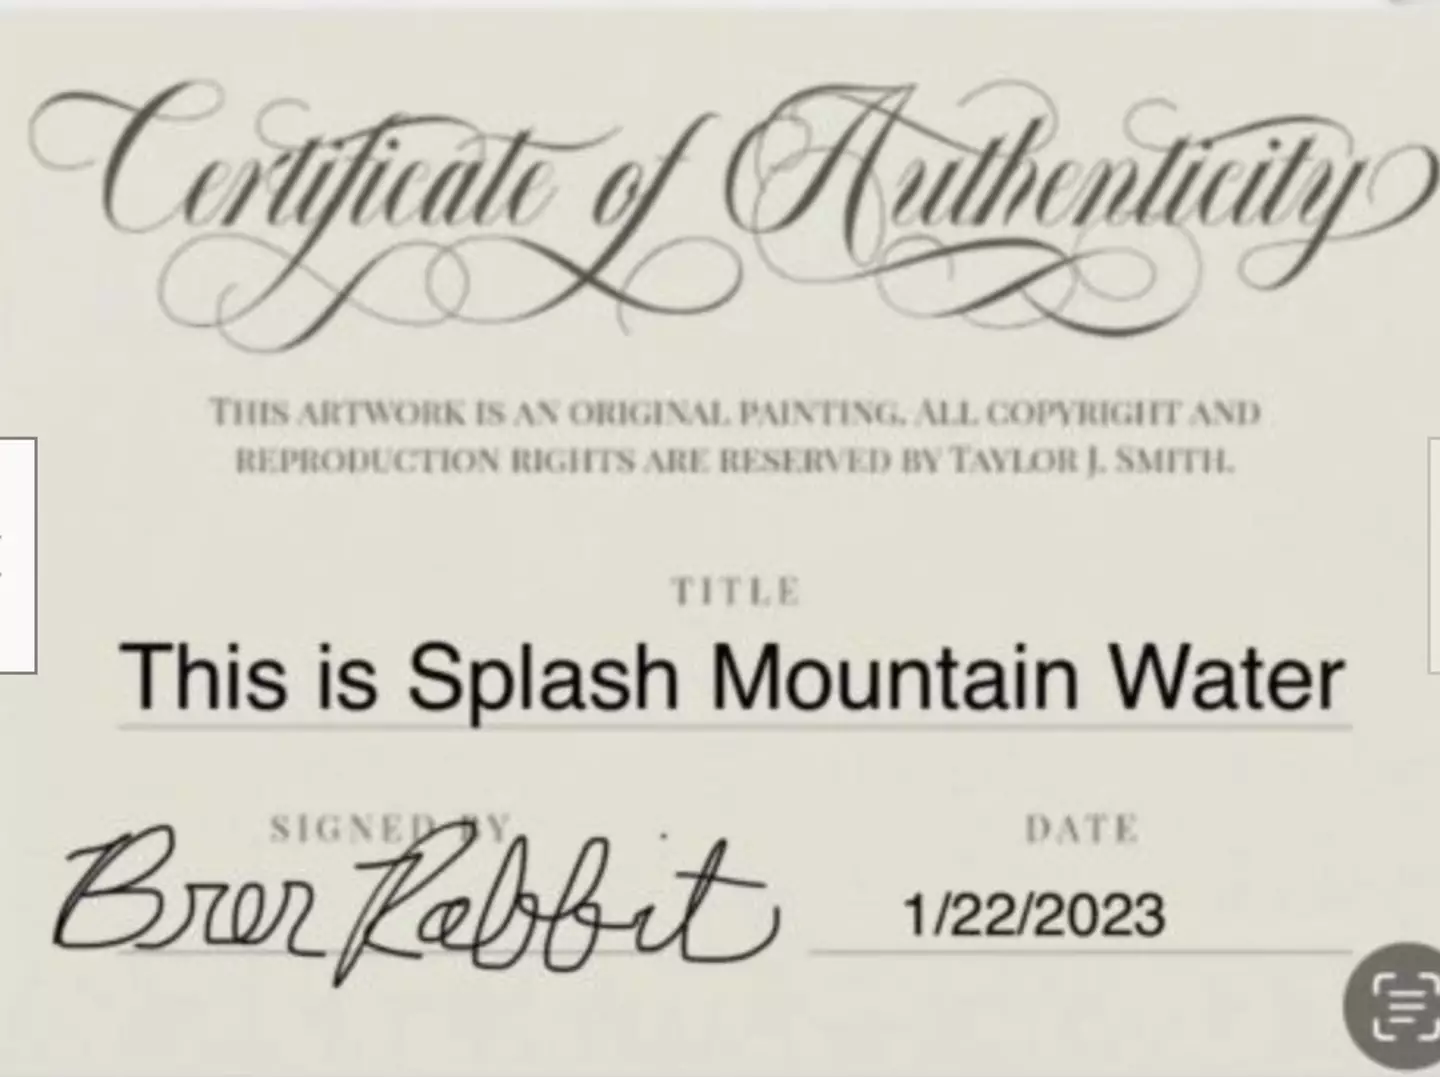 The certificate doesn't look very authentic.